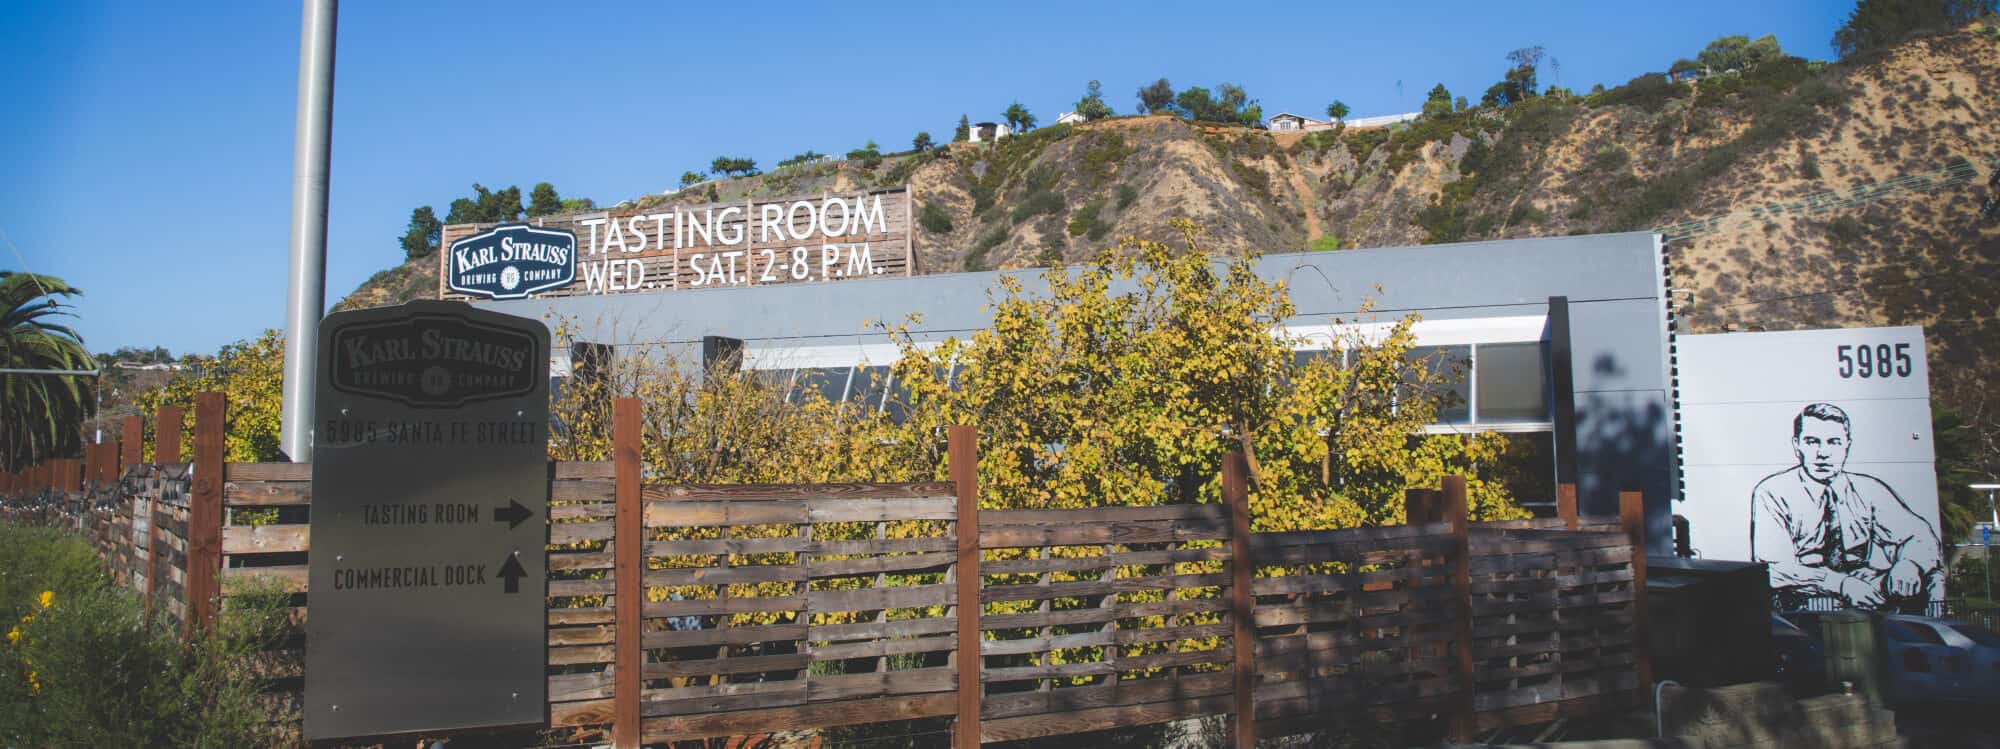 Tasting Room Banner Image 2015 Karl Strauss Brewing Company